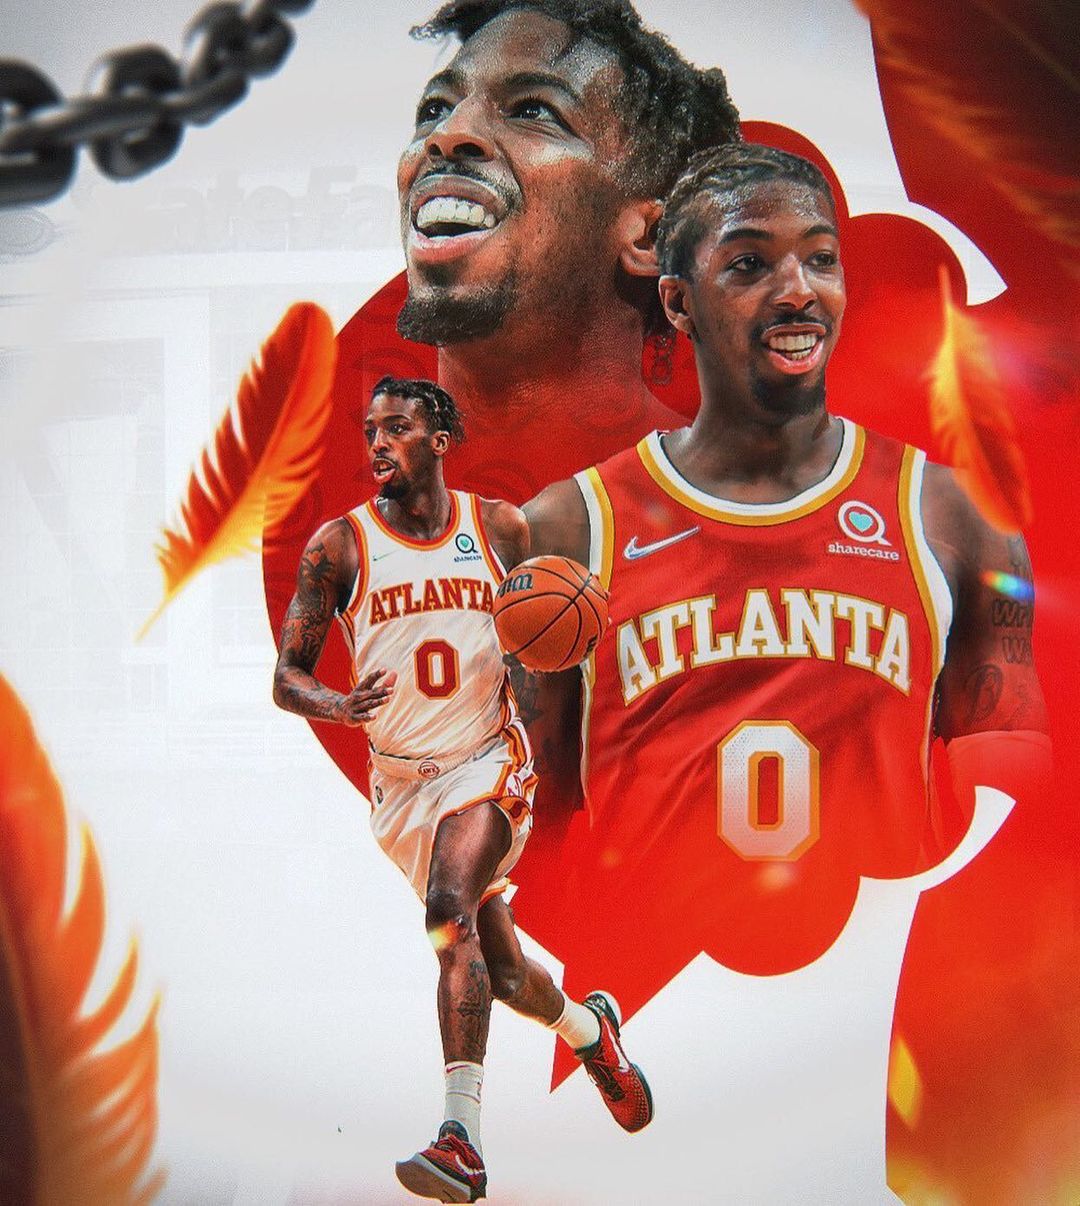 Delon Wright fan club, this one’s for you  : @hawks.report for #FanArtFriday...